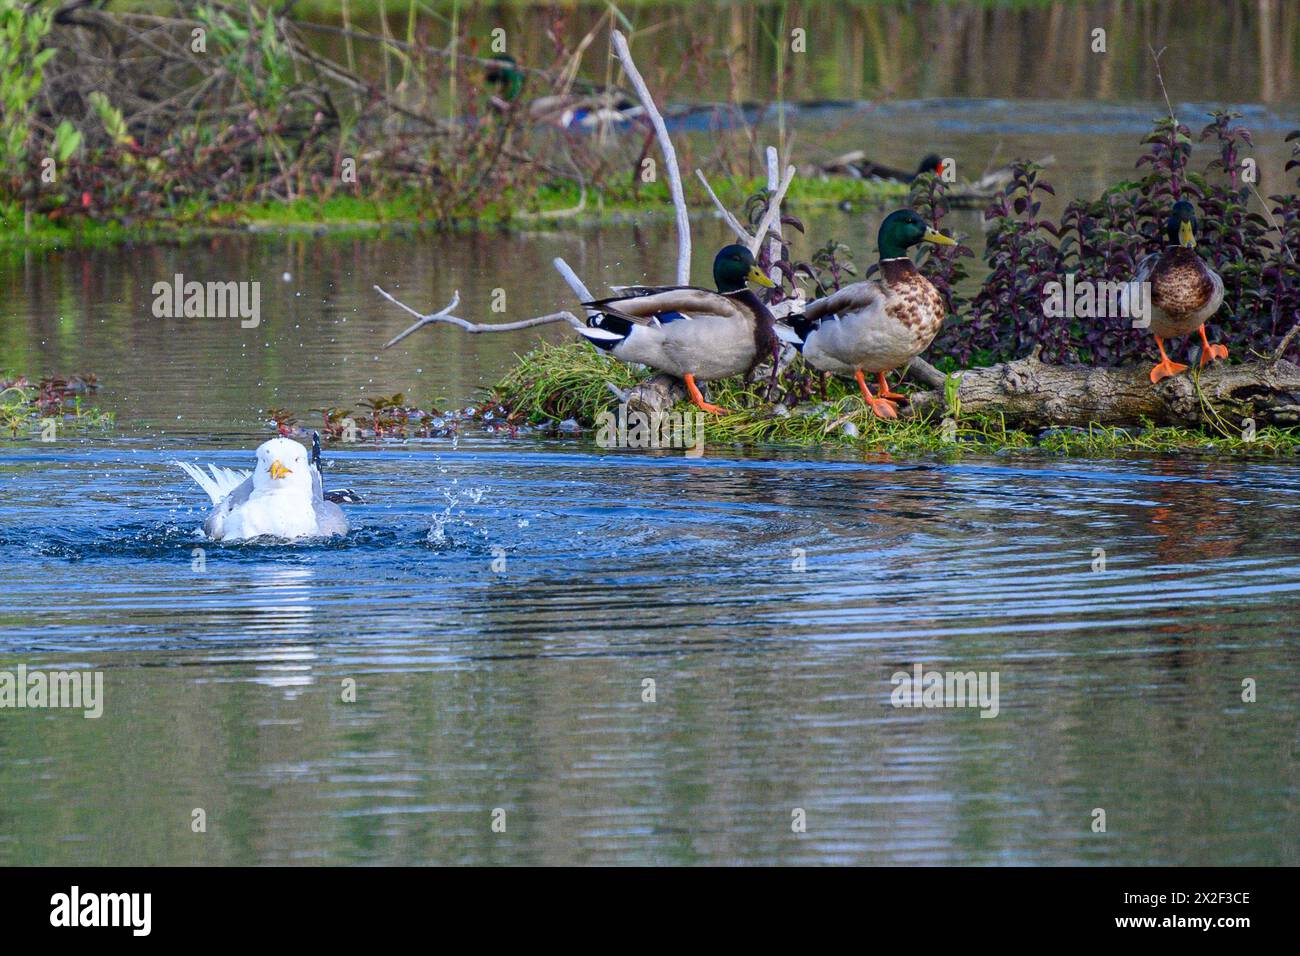 Seagull swims in the water next to Mallard (Anas platyrhynchos) swimming in the water. Photographed at the man-made ecological pond and bird sanctuary Stock Photo